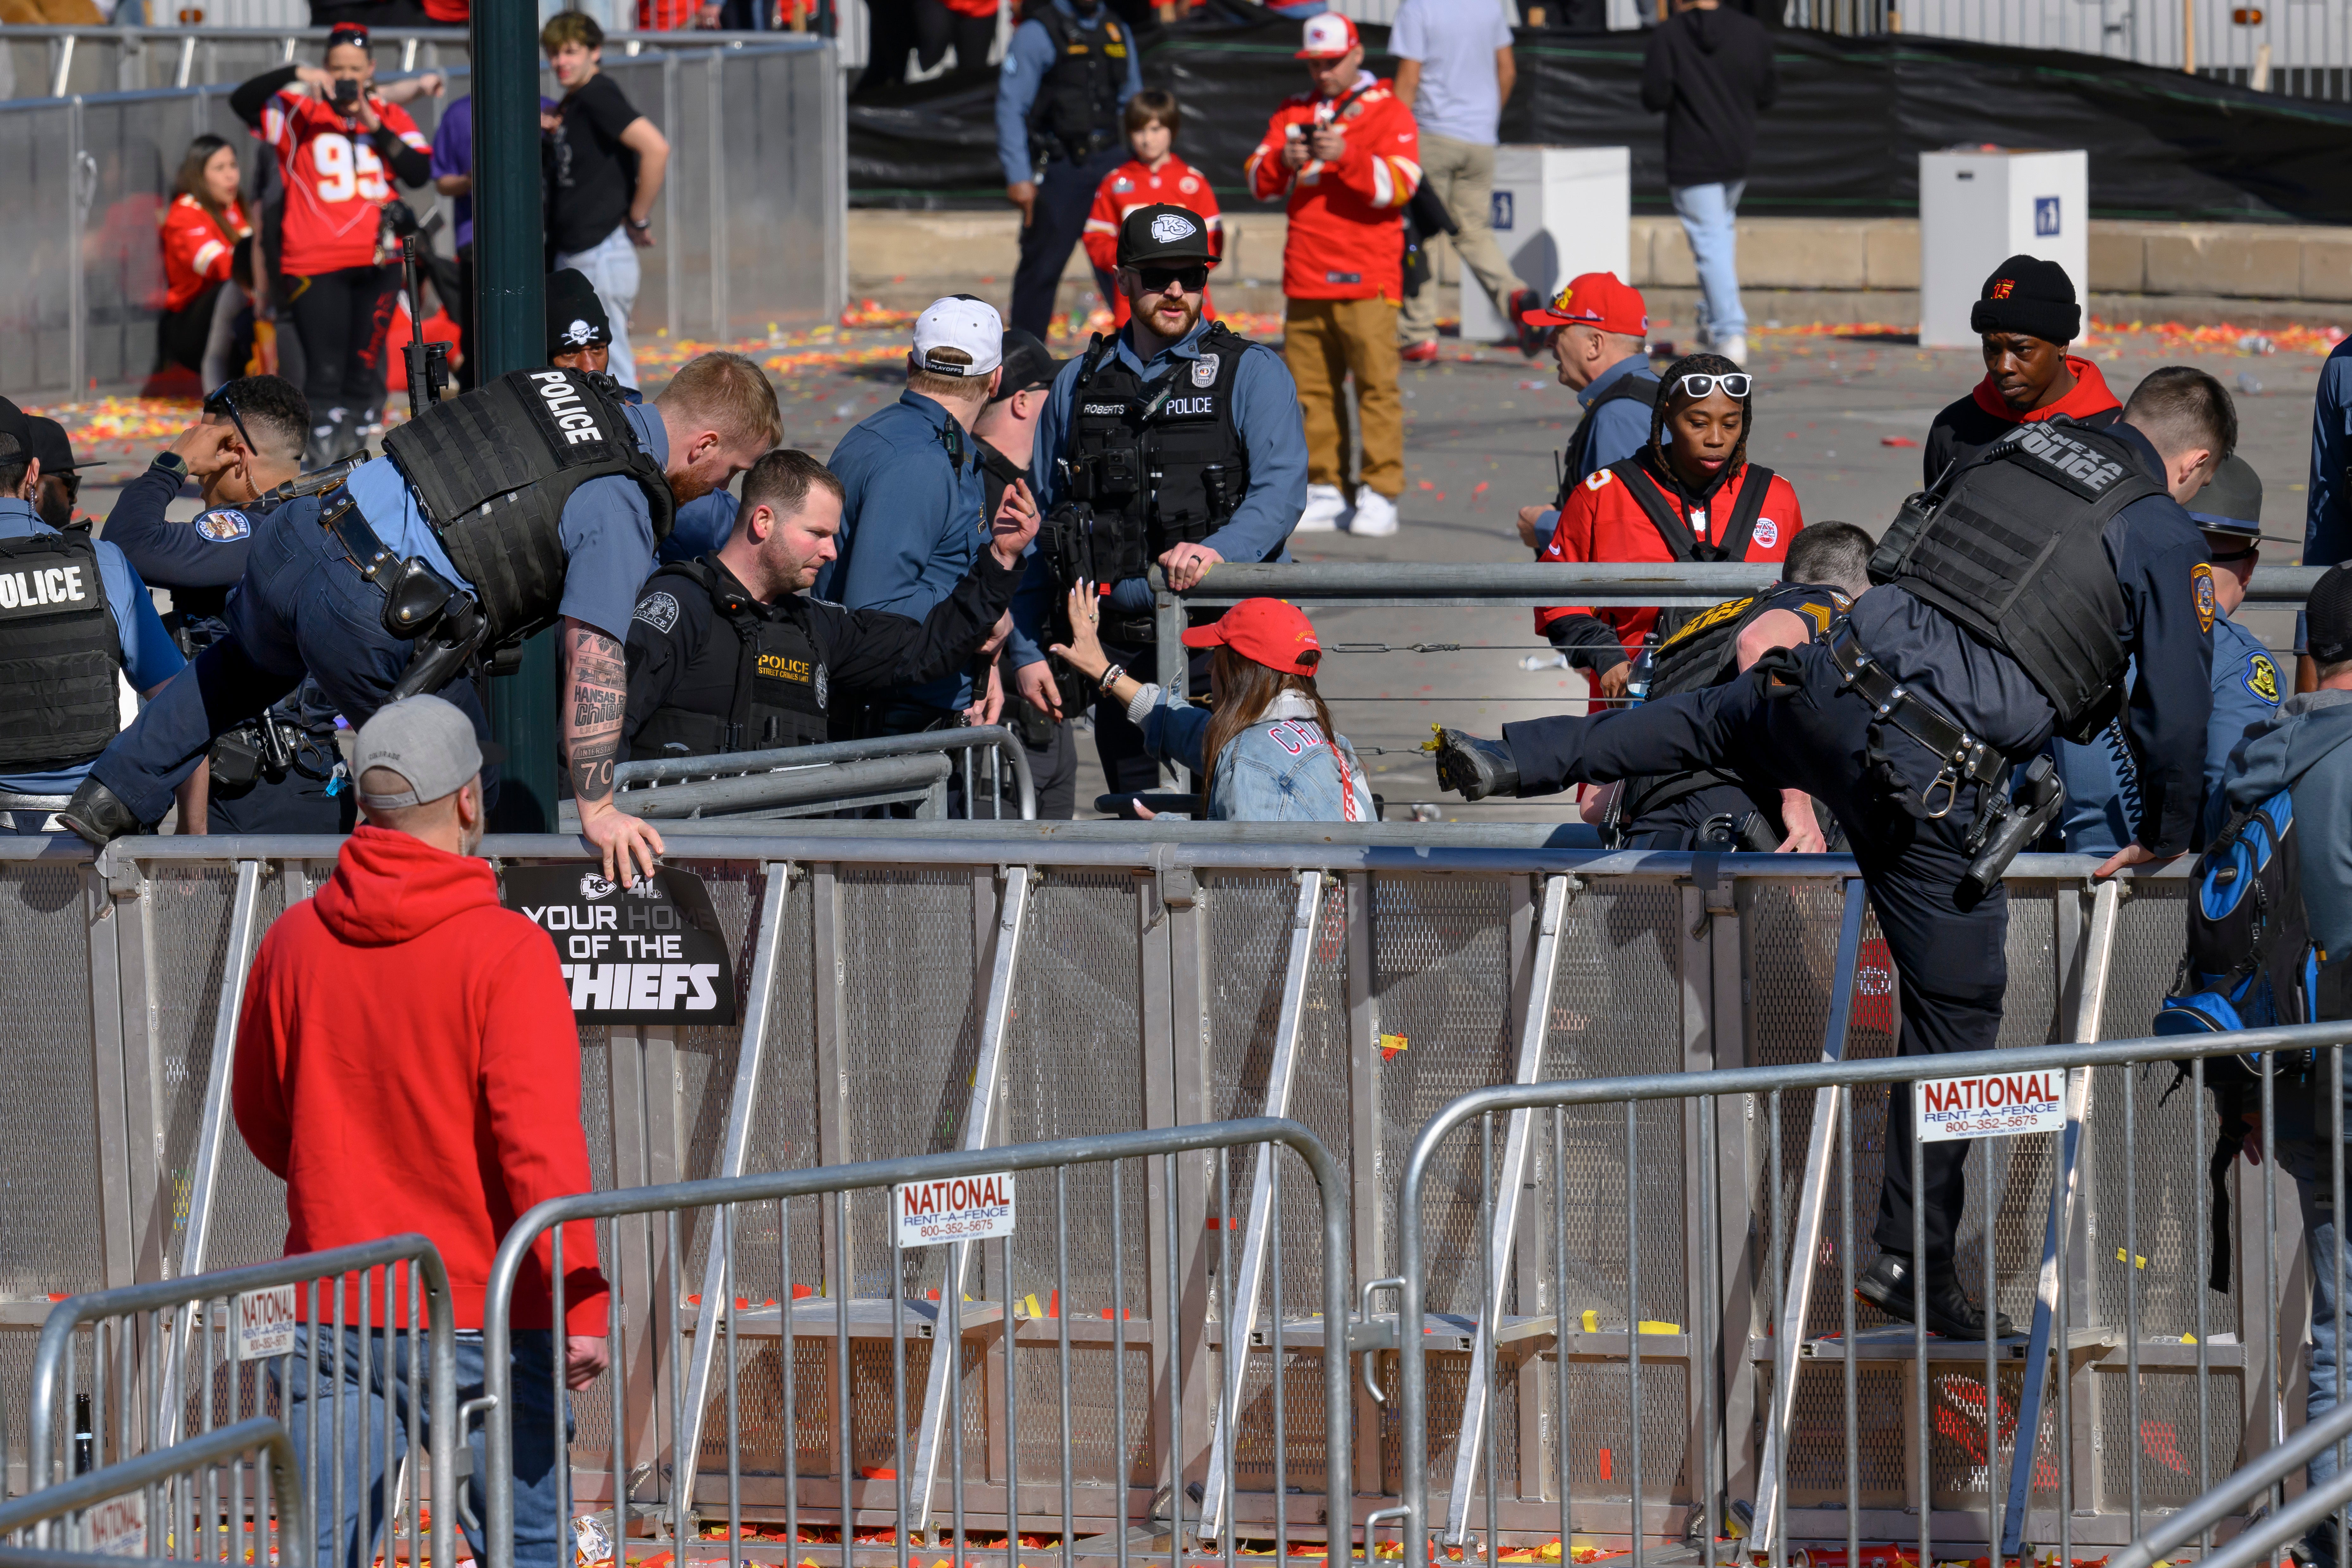 At least 22 people suffered gunshot wounds when shooters attacked the Kansas City Chiefs Super Bowl parade